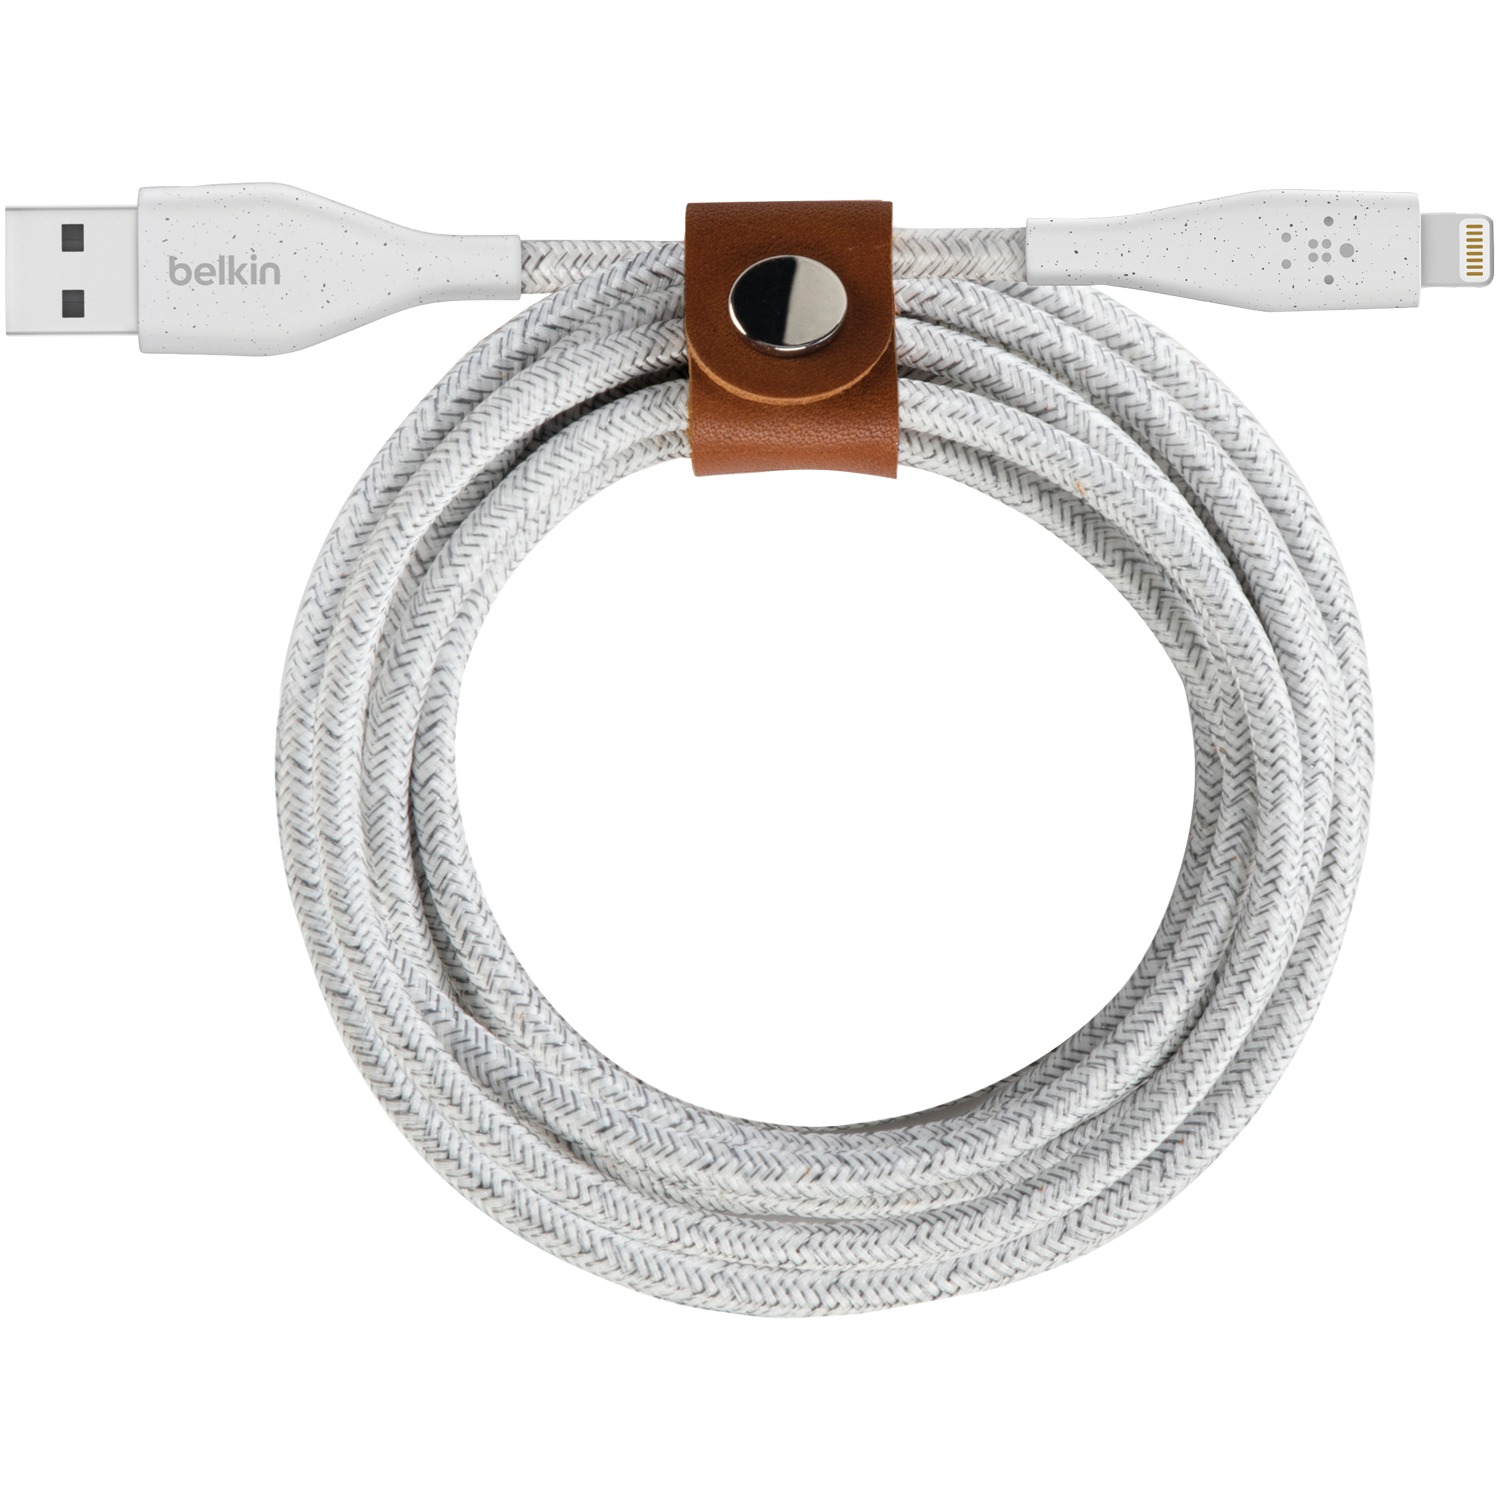 Belkin F8J236bt04-WHT DuraTek Plus Lightning to USB-A Cable, 4 Feet (White) - image 5 of 9